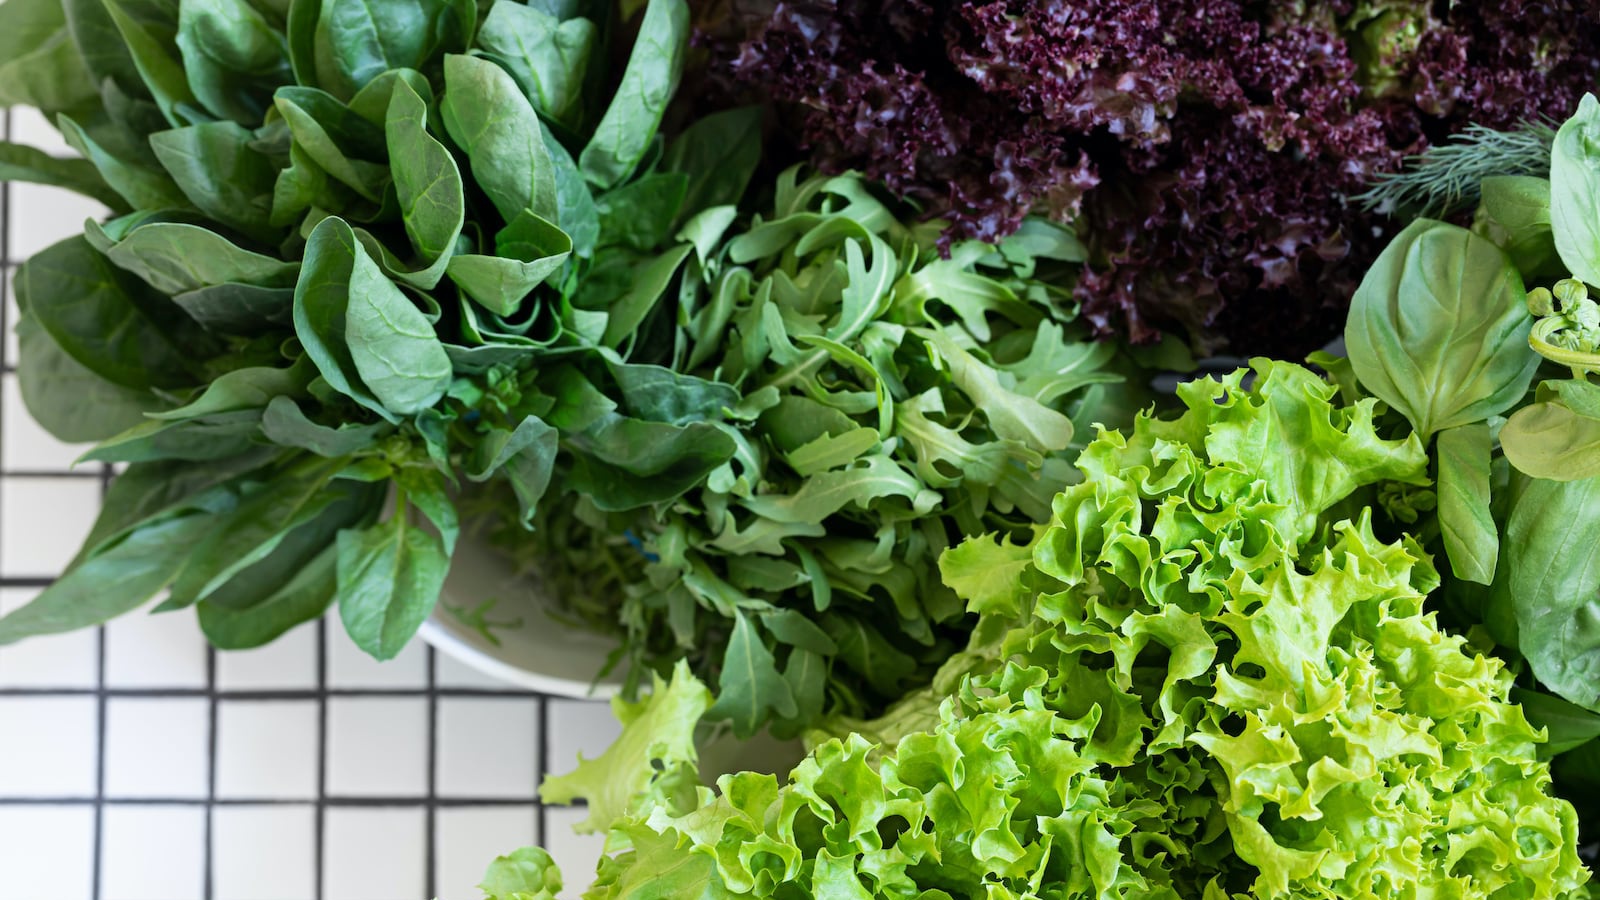 Battle of the Leafy Greens: What Greens Are Best for You